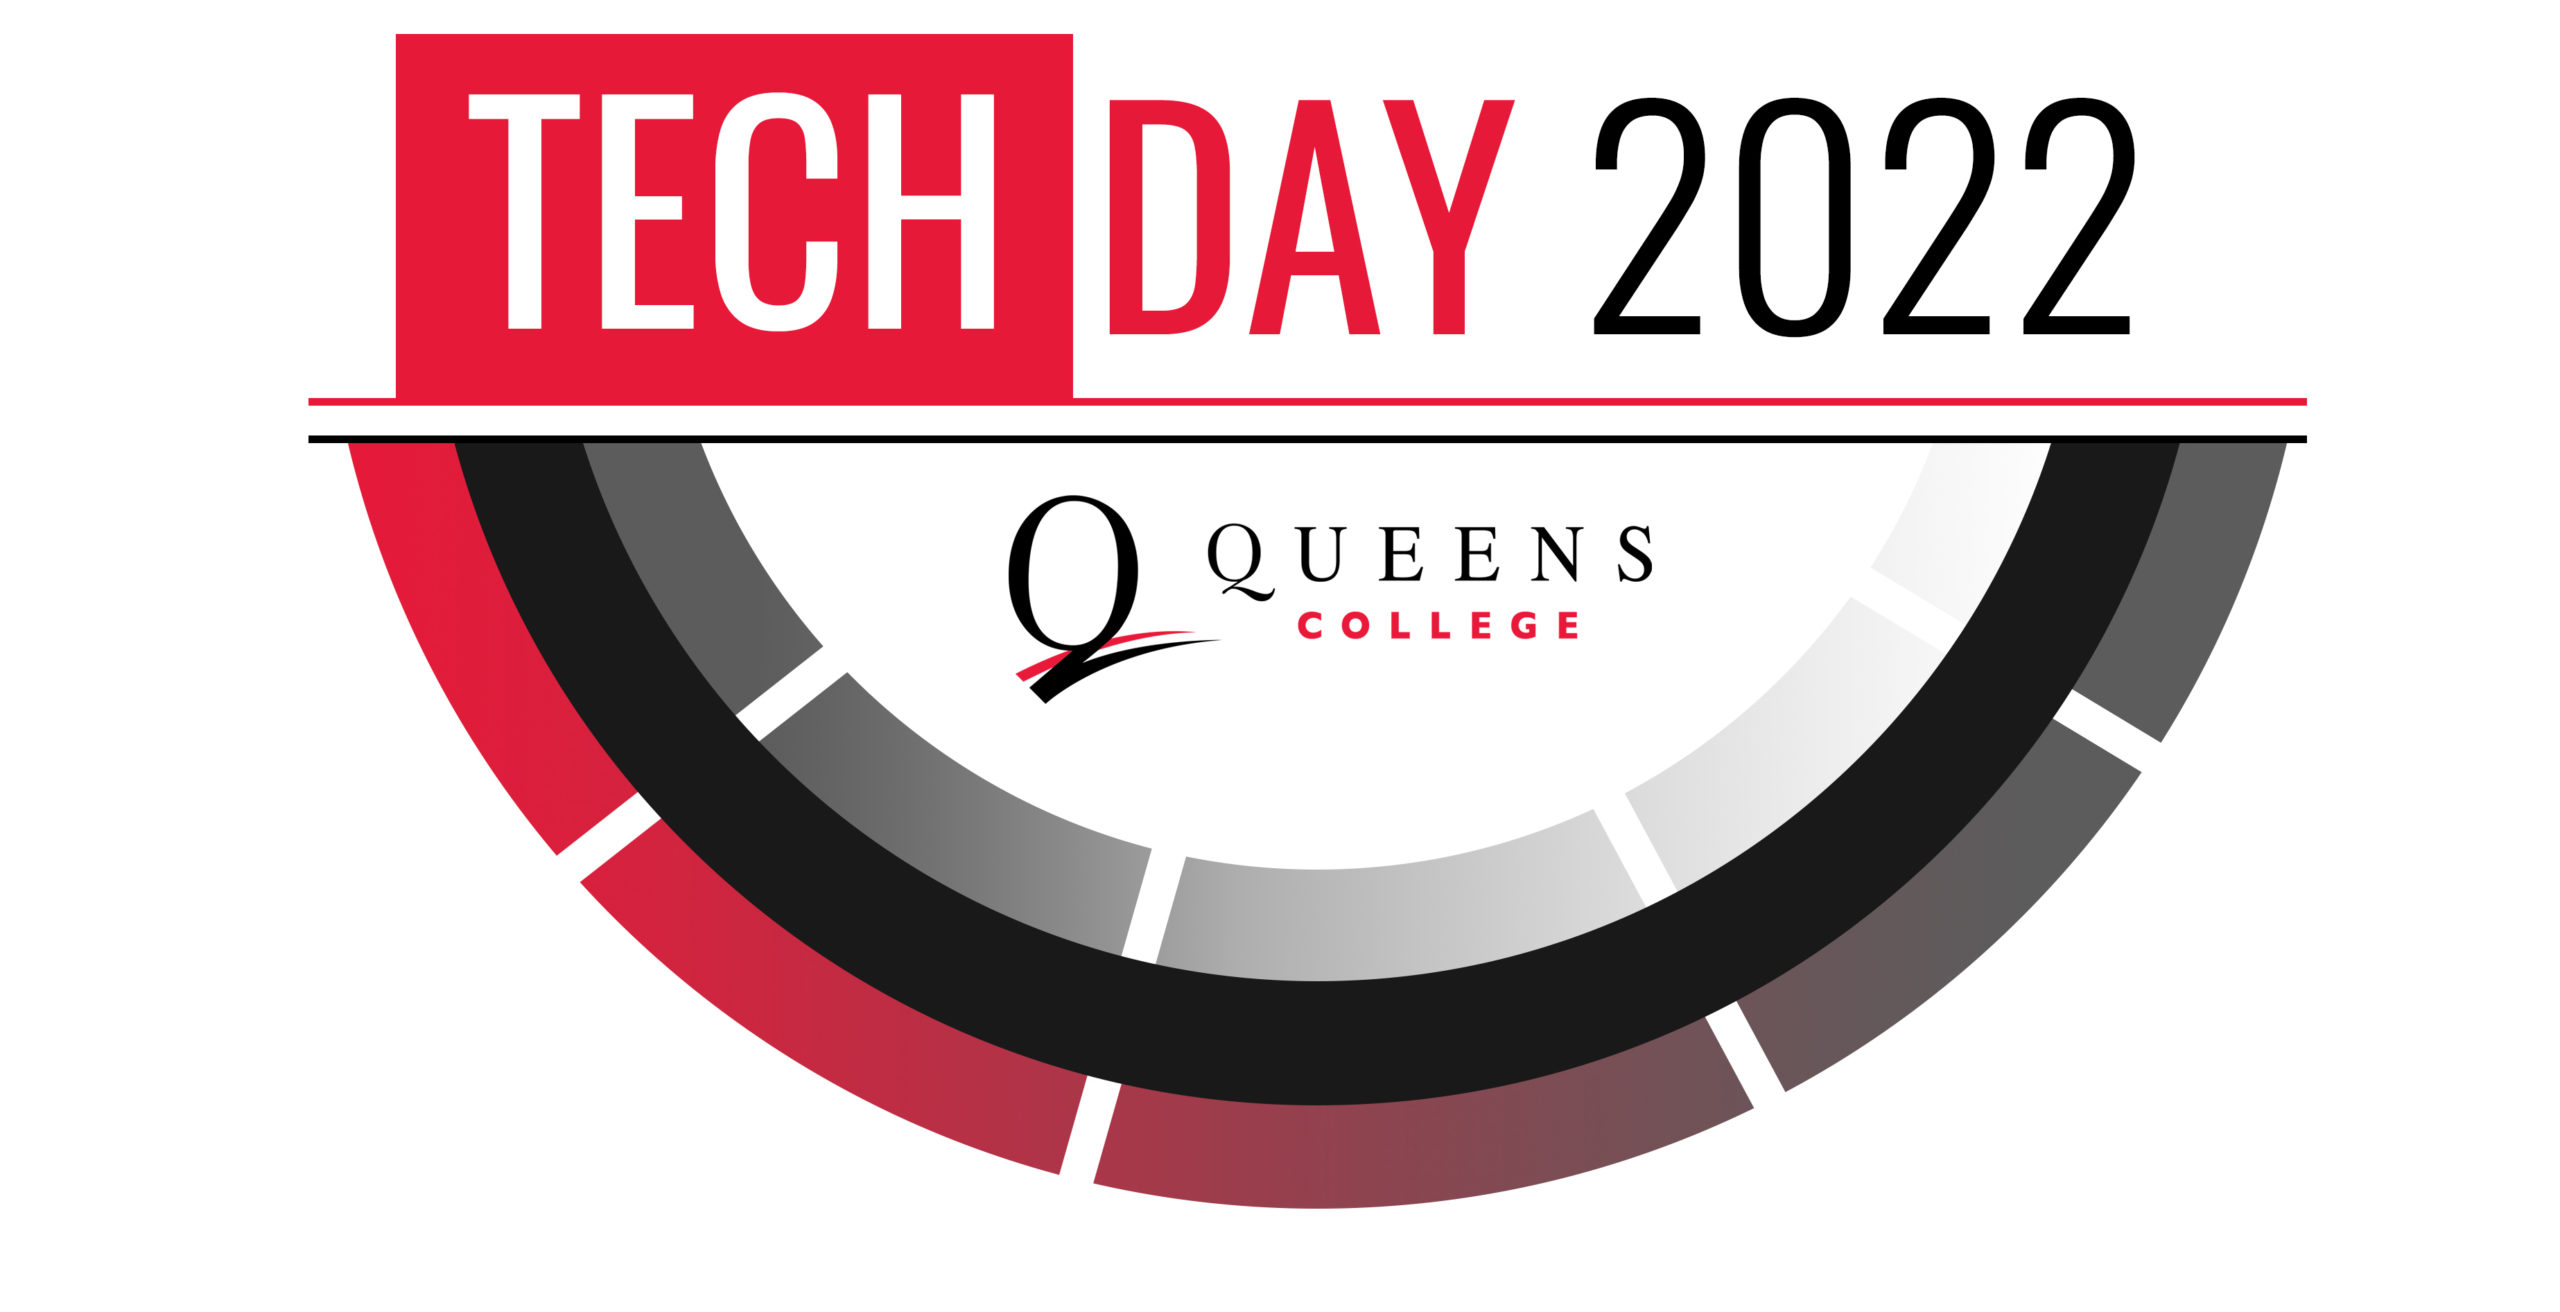 QC Tech Day Graphic. Event to be held on Wednesday, November 2, 2022, in the Music Building Atrium.